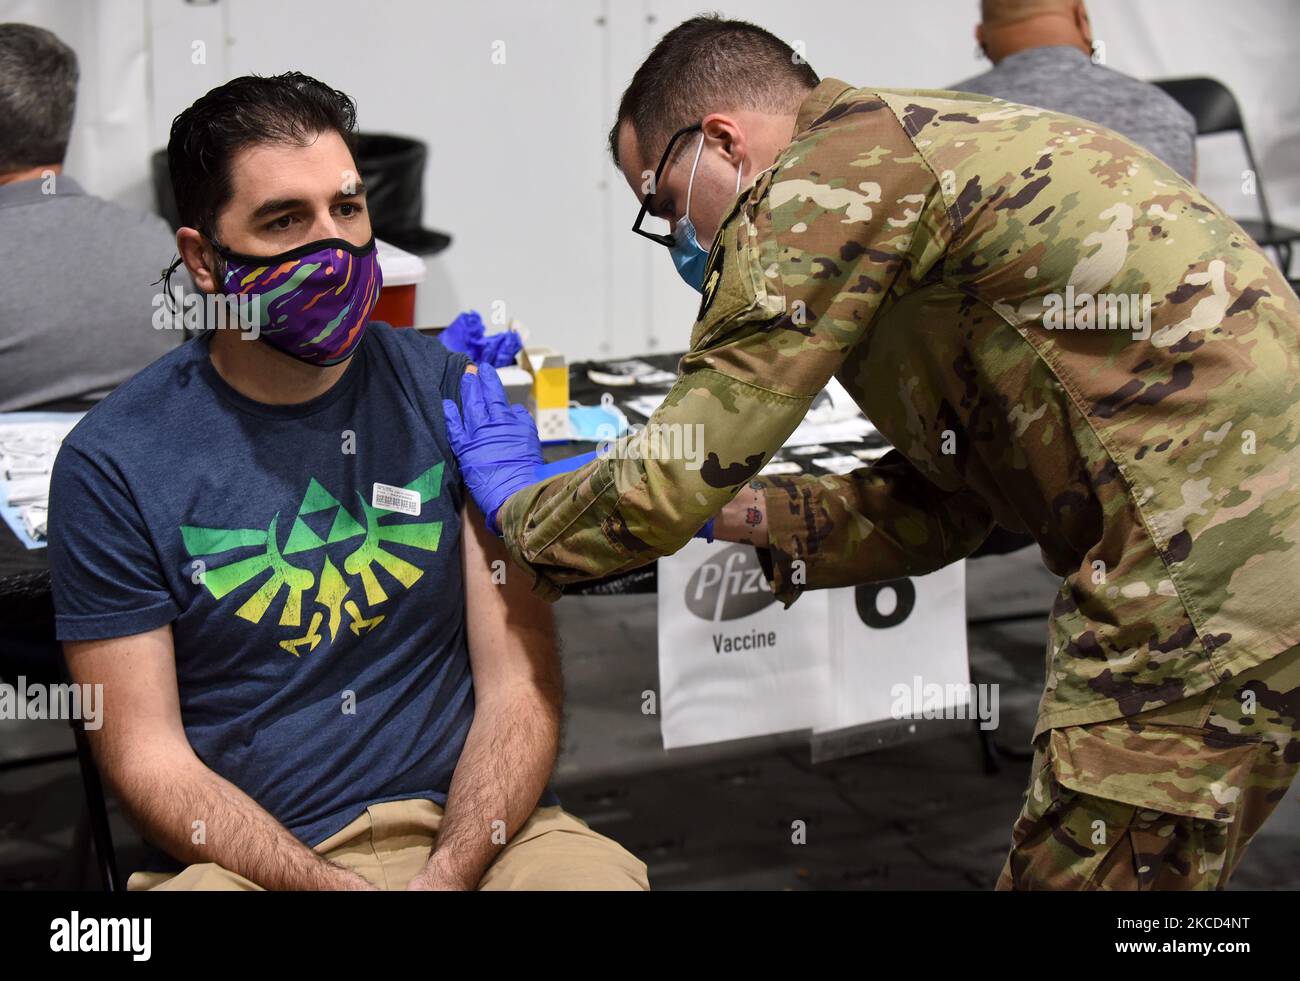 An Army medic from Fort Campbell, Kentucky gives Tim Zenkel a COVID-19 vaccine shot at a FEMA supported vaccination site at Valencia State College on April 20, 2021 in Orlando, Florida. The site, which had offered the Johnson & Johnson vaccine before the vaccine pause, today began administering up to 3,000 first and second doses daily of the Pfizer vaccine. (Photo by Paul Hennessy/NurPhoto) Stock Photo